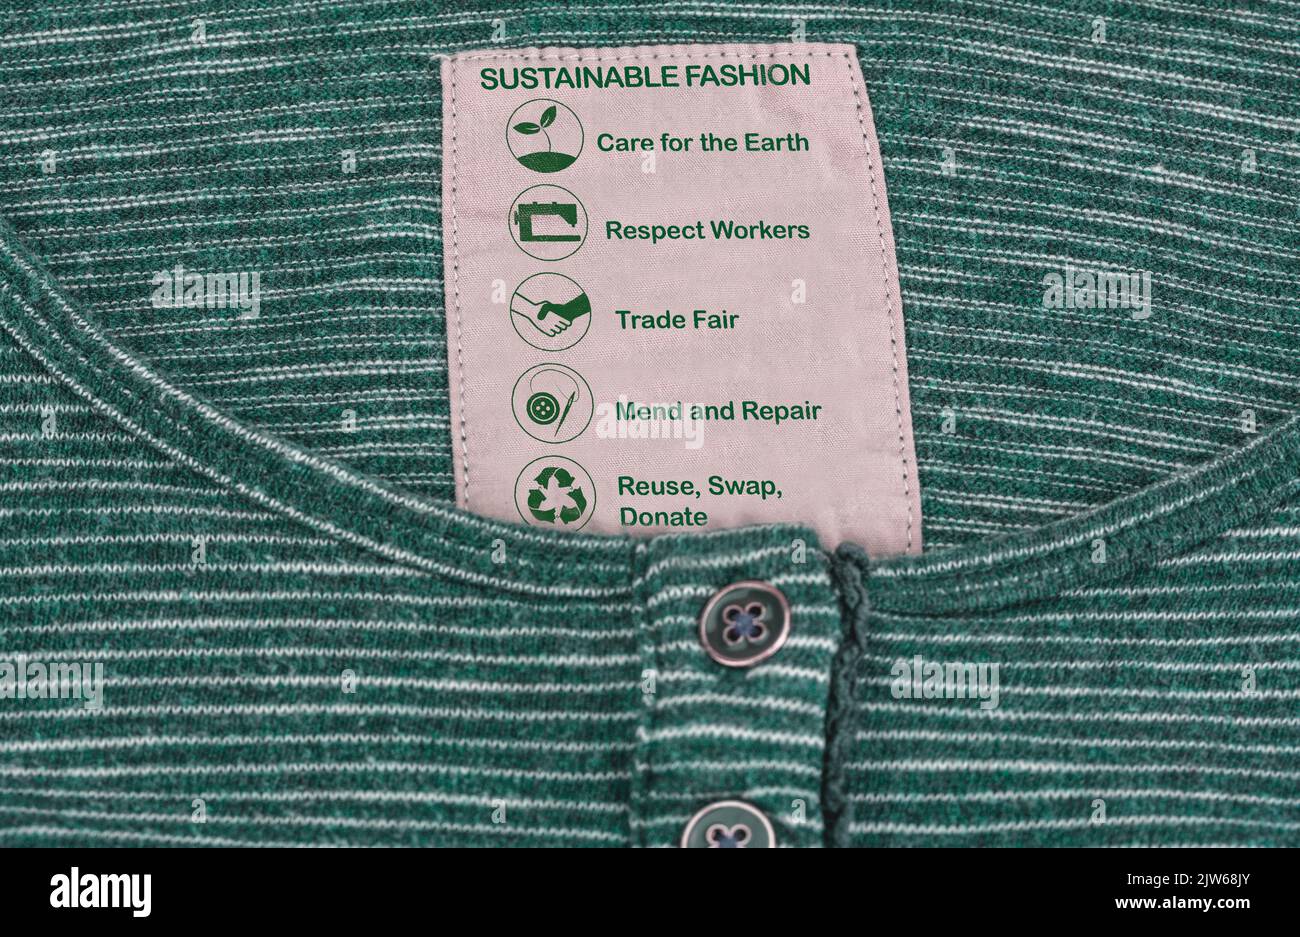 Sustainable fashion label on shirt, care for the environment and ethical fashion concept Stock Photo